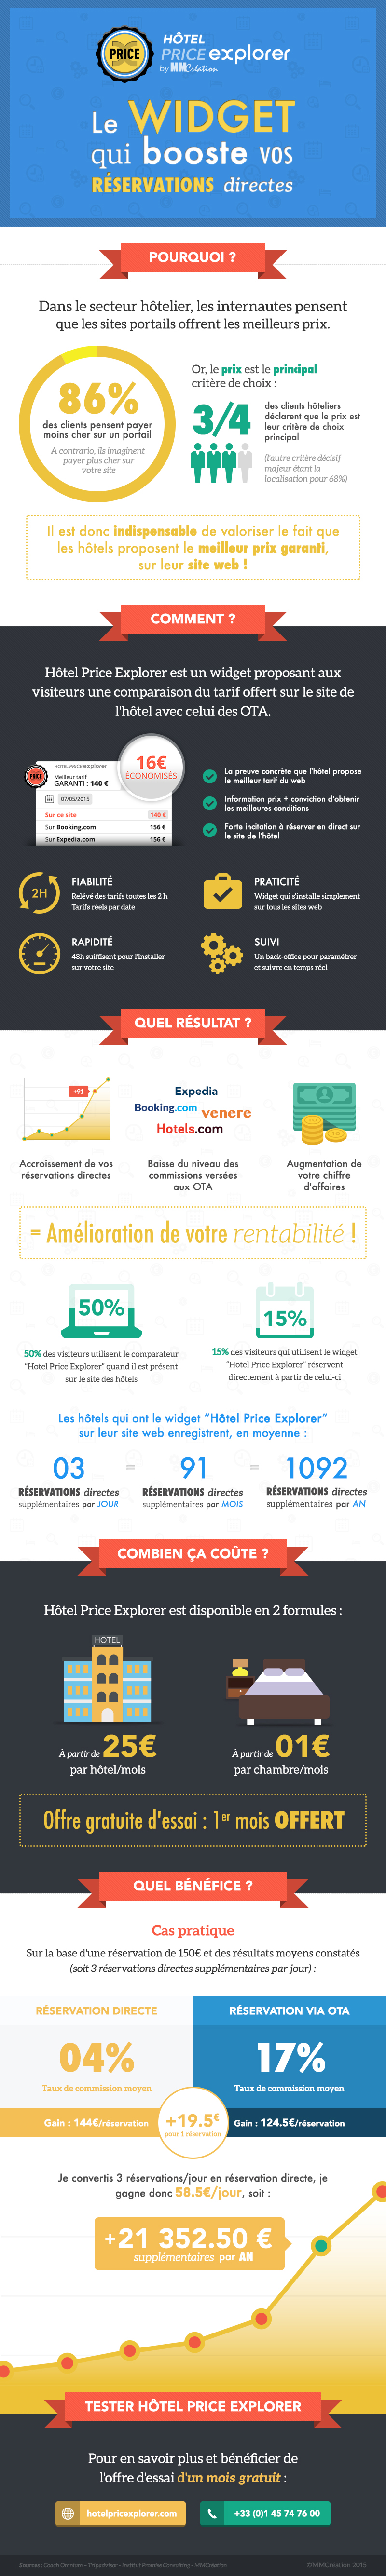 Infographie_HPE2